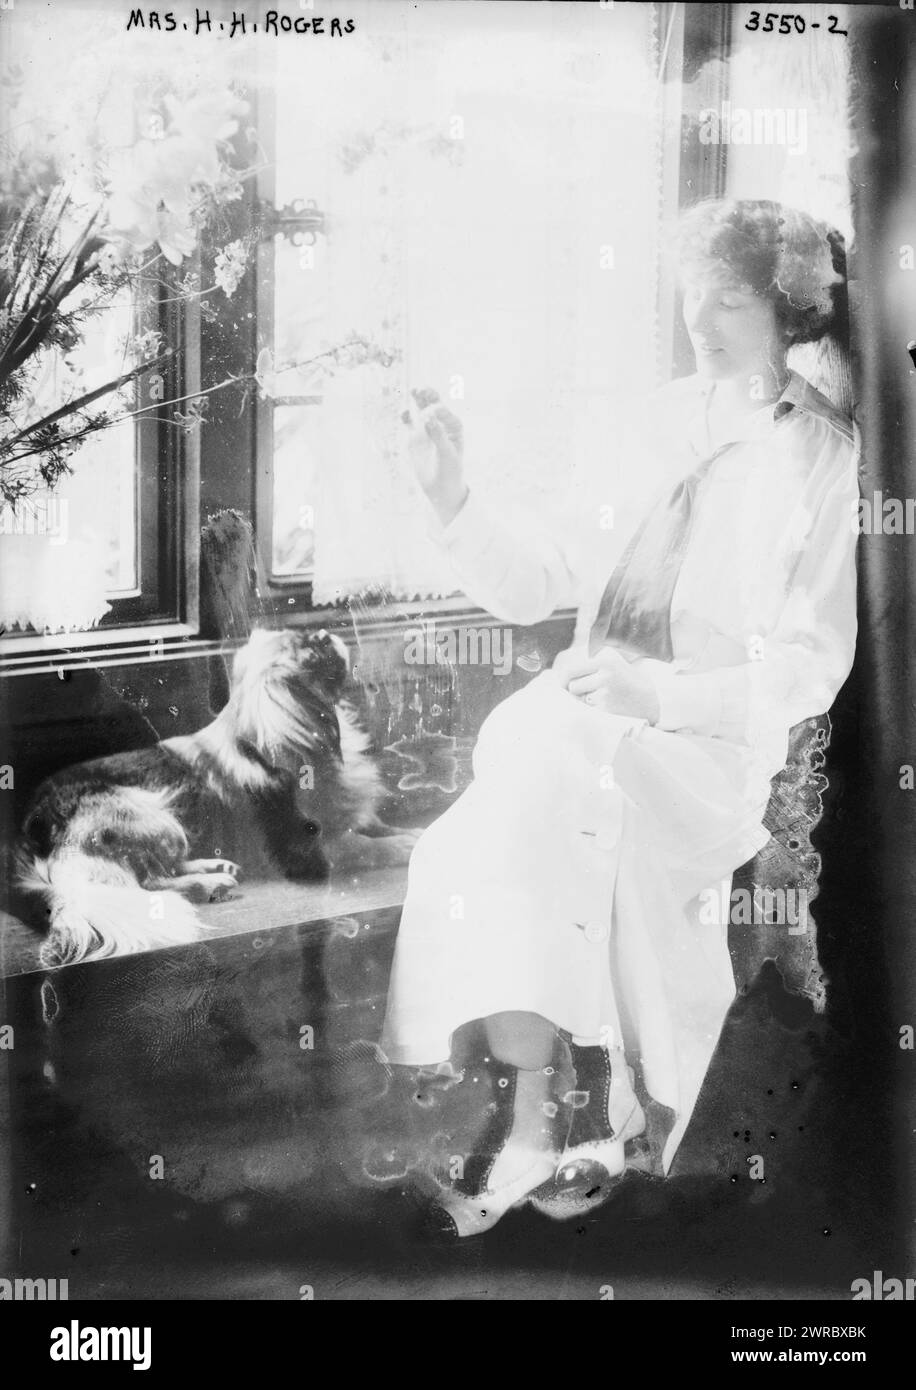 Mrs. H.H. Rogers, Photograph shows Mrs. Henry H. Rogers, Jr. (Mary Benjamin Rogers) who was the wife of Henry 'Harry' Huttleston Rogers, Jr., the Standard Oil heir., between ca. 1910 and ca. 1915, Glass negatives, 1 negative: glass Stock Photo